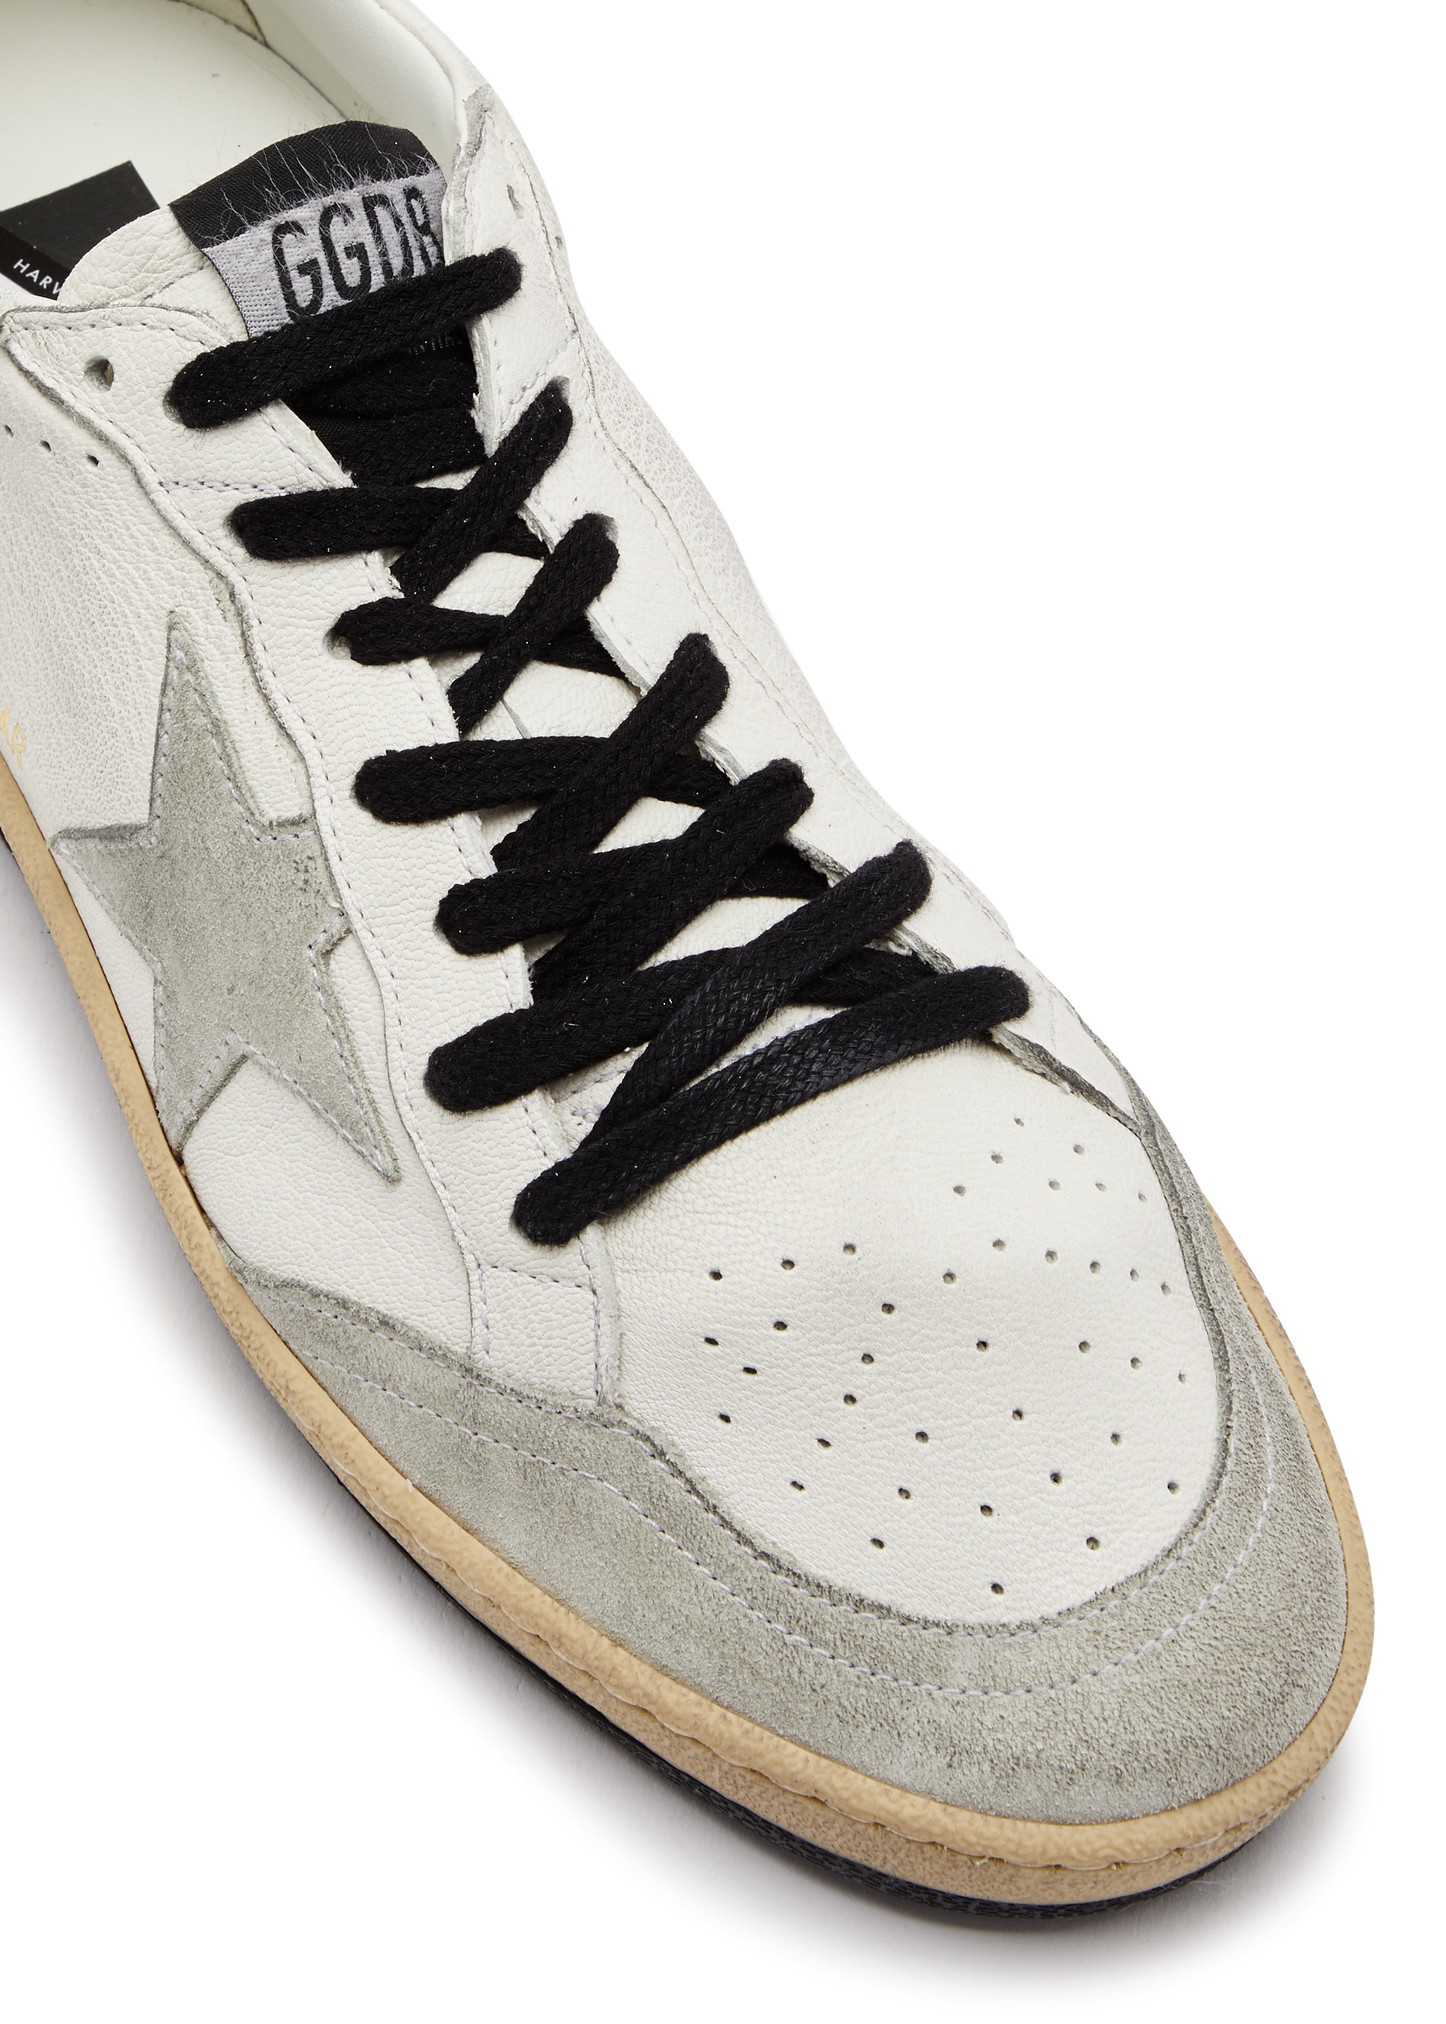 Ball Star distressed leather sneakers - 4